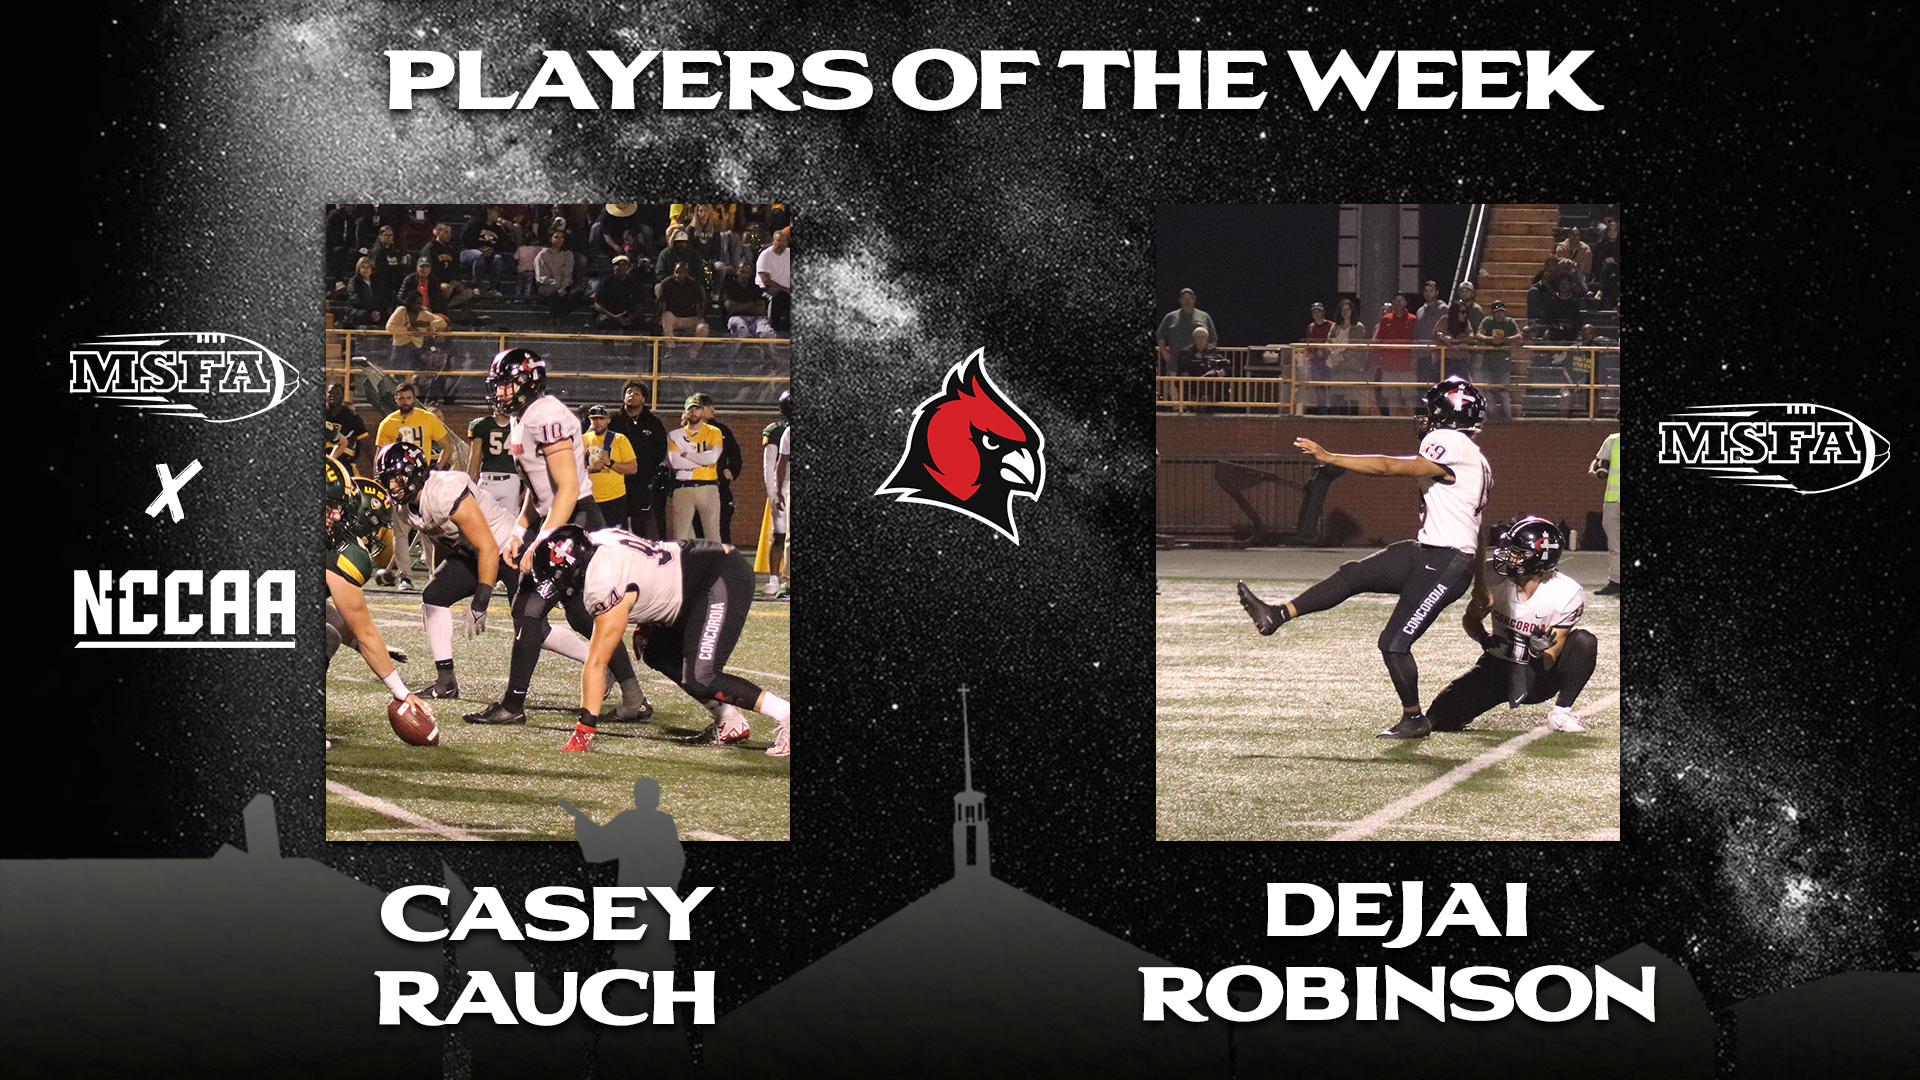 Rauch earns MSFA and NCCAA Defensive Player of the Week; Robinson earns MSFA Special Teams Player of the Week